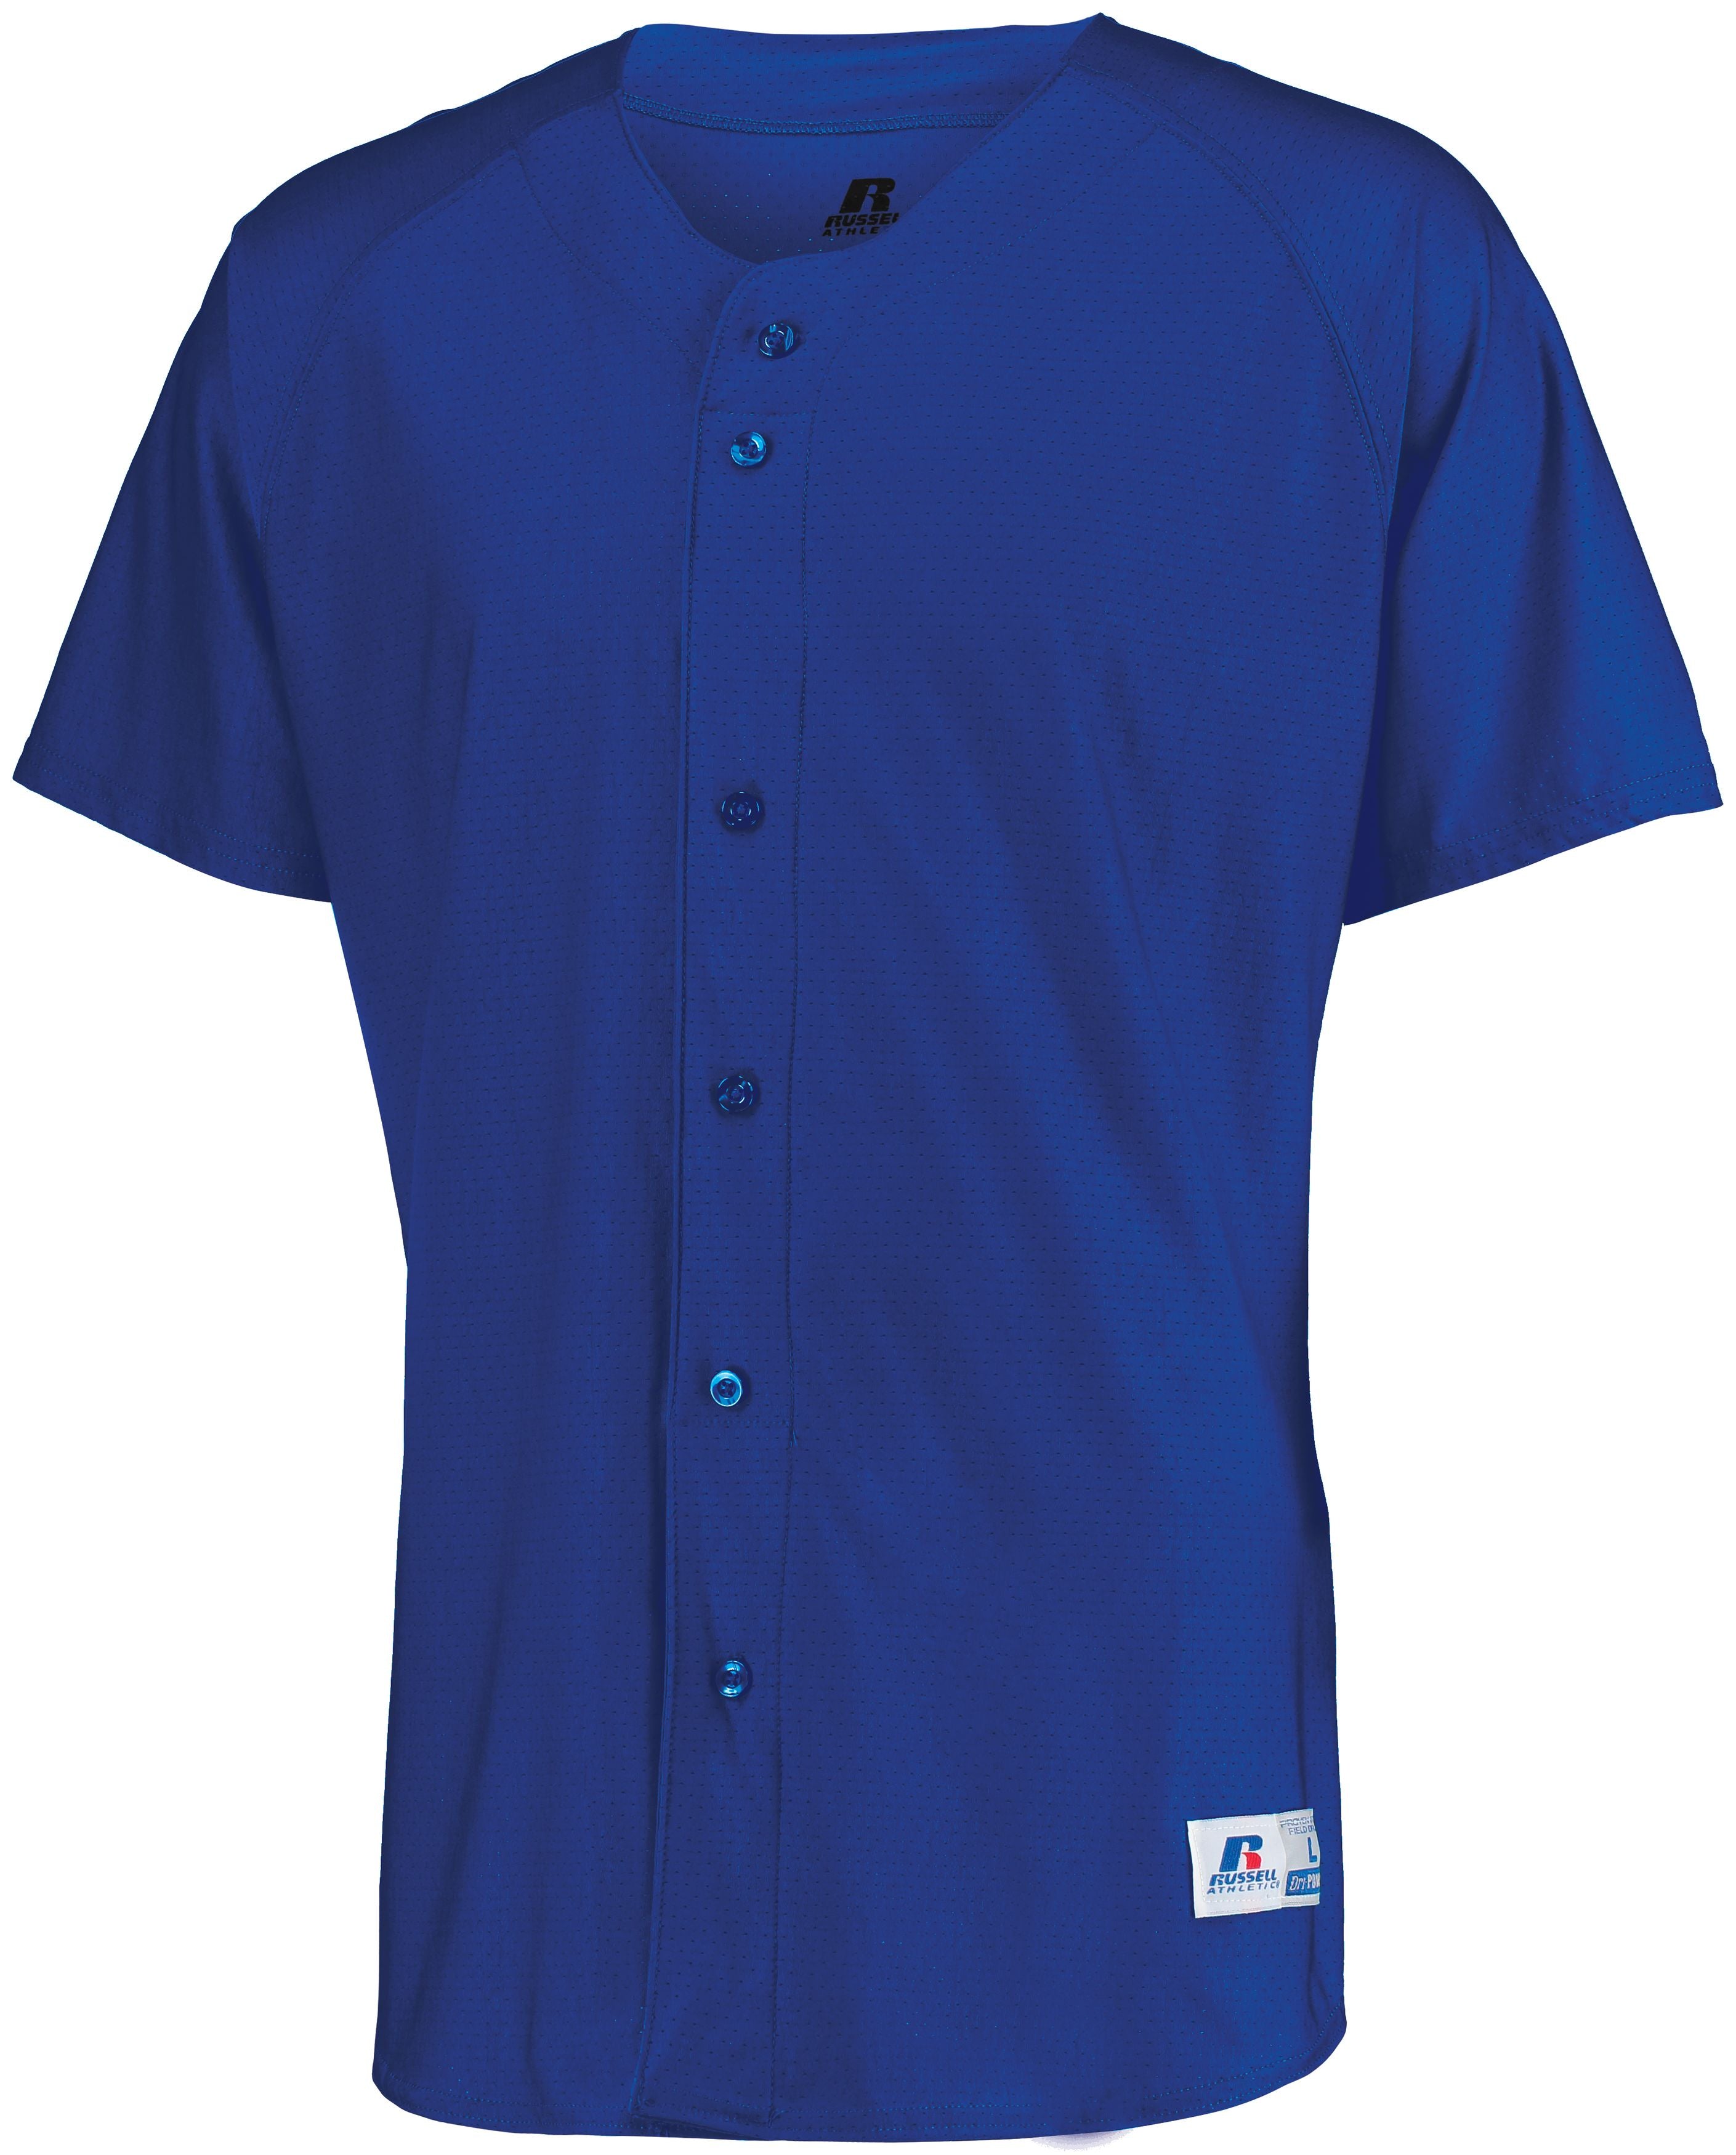 Russell Athletic Raglan Sleeve Button Front Jersey in Royal  -Part of the Adult, Adult-Jersey, Baseball, Russell-Athletic-Products, Shirts, All-Sports, All-Sports-1 product lines at KanaleyCreations.com